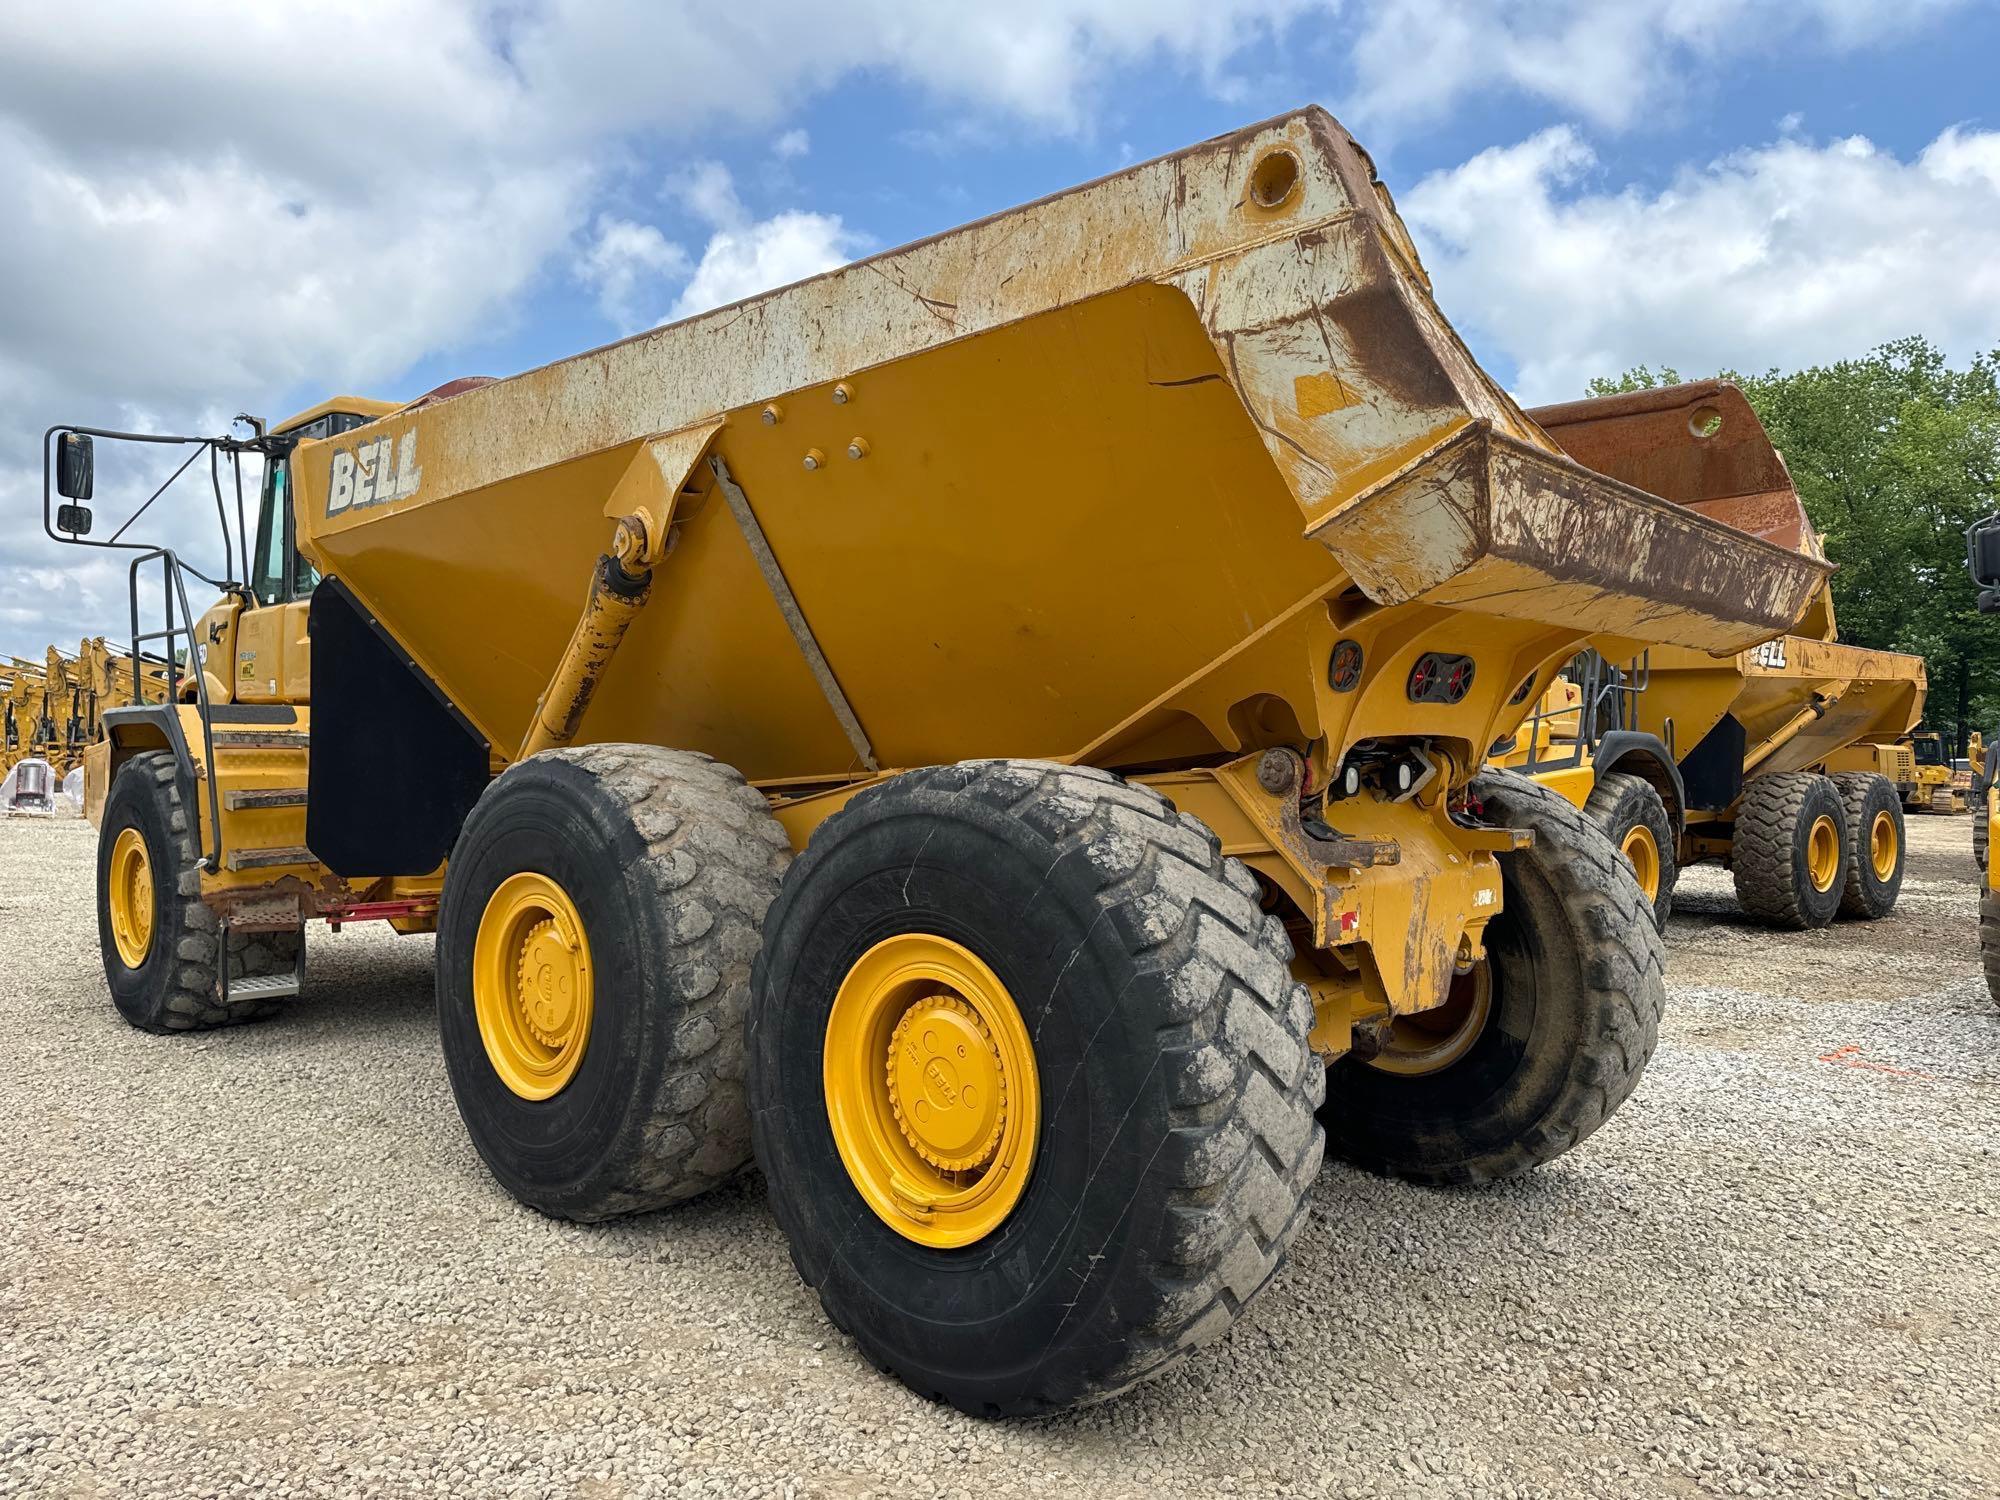 2015 BELL B35D ARTICULATED HAUL TRUCK SN:7405264 6x6, powered by diesel engine, equipped with Cab,